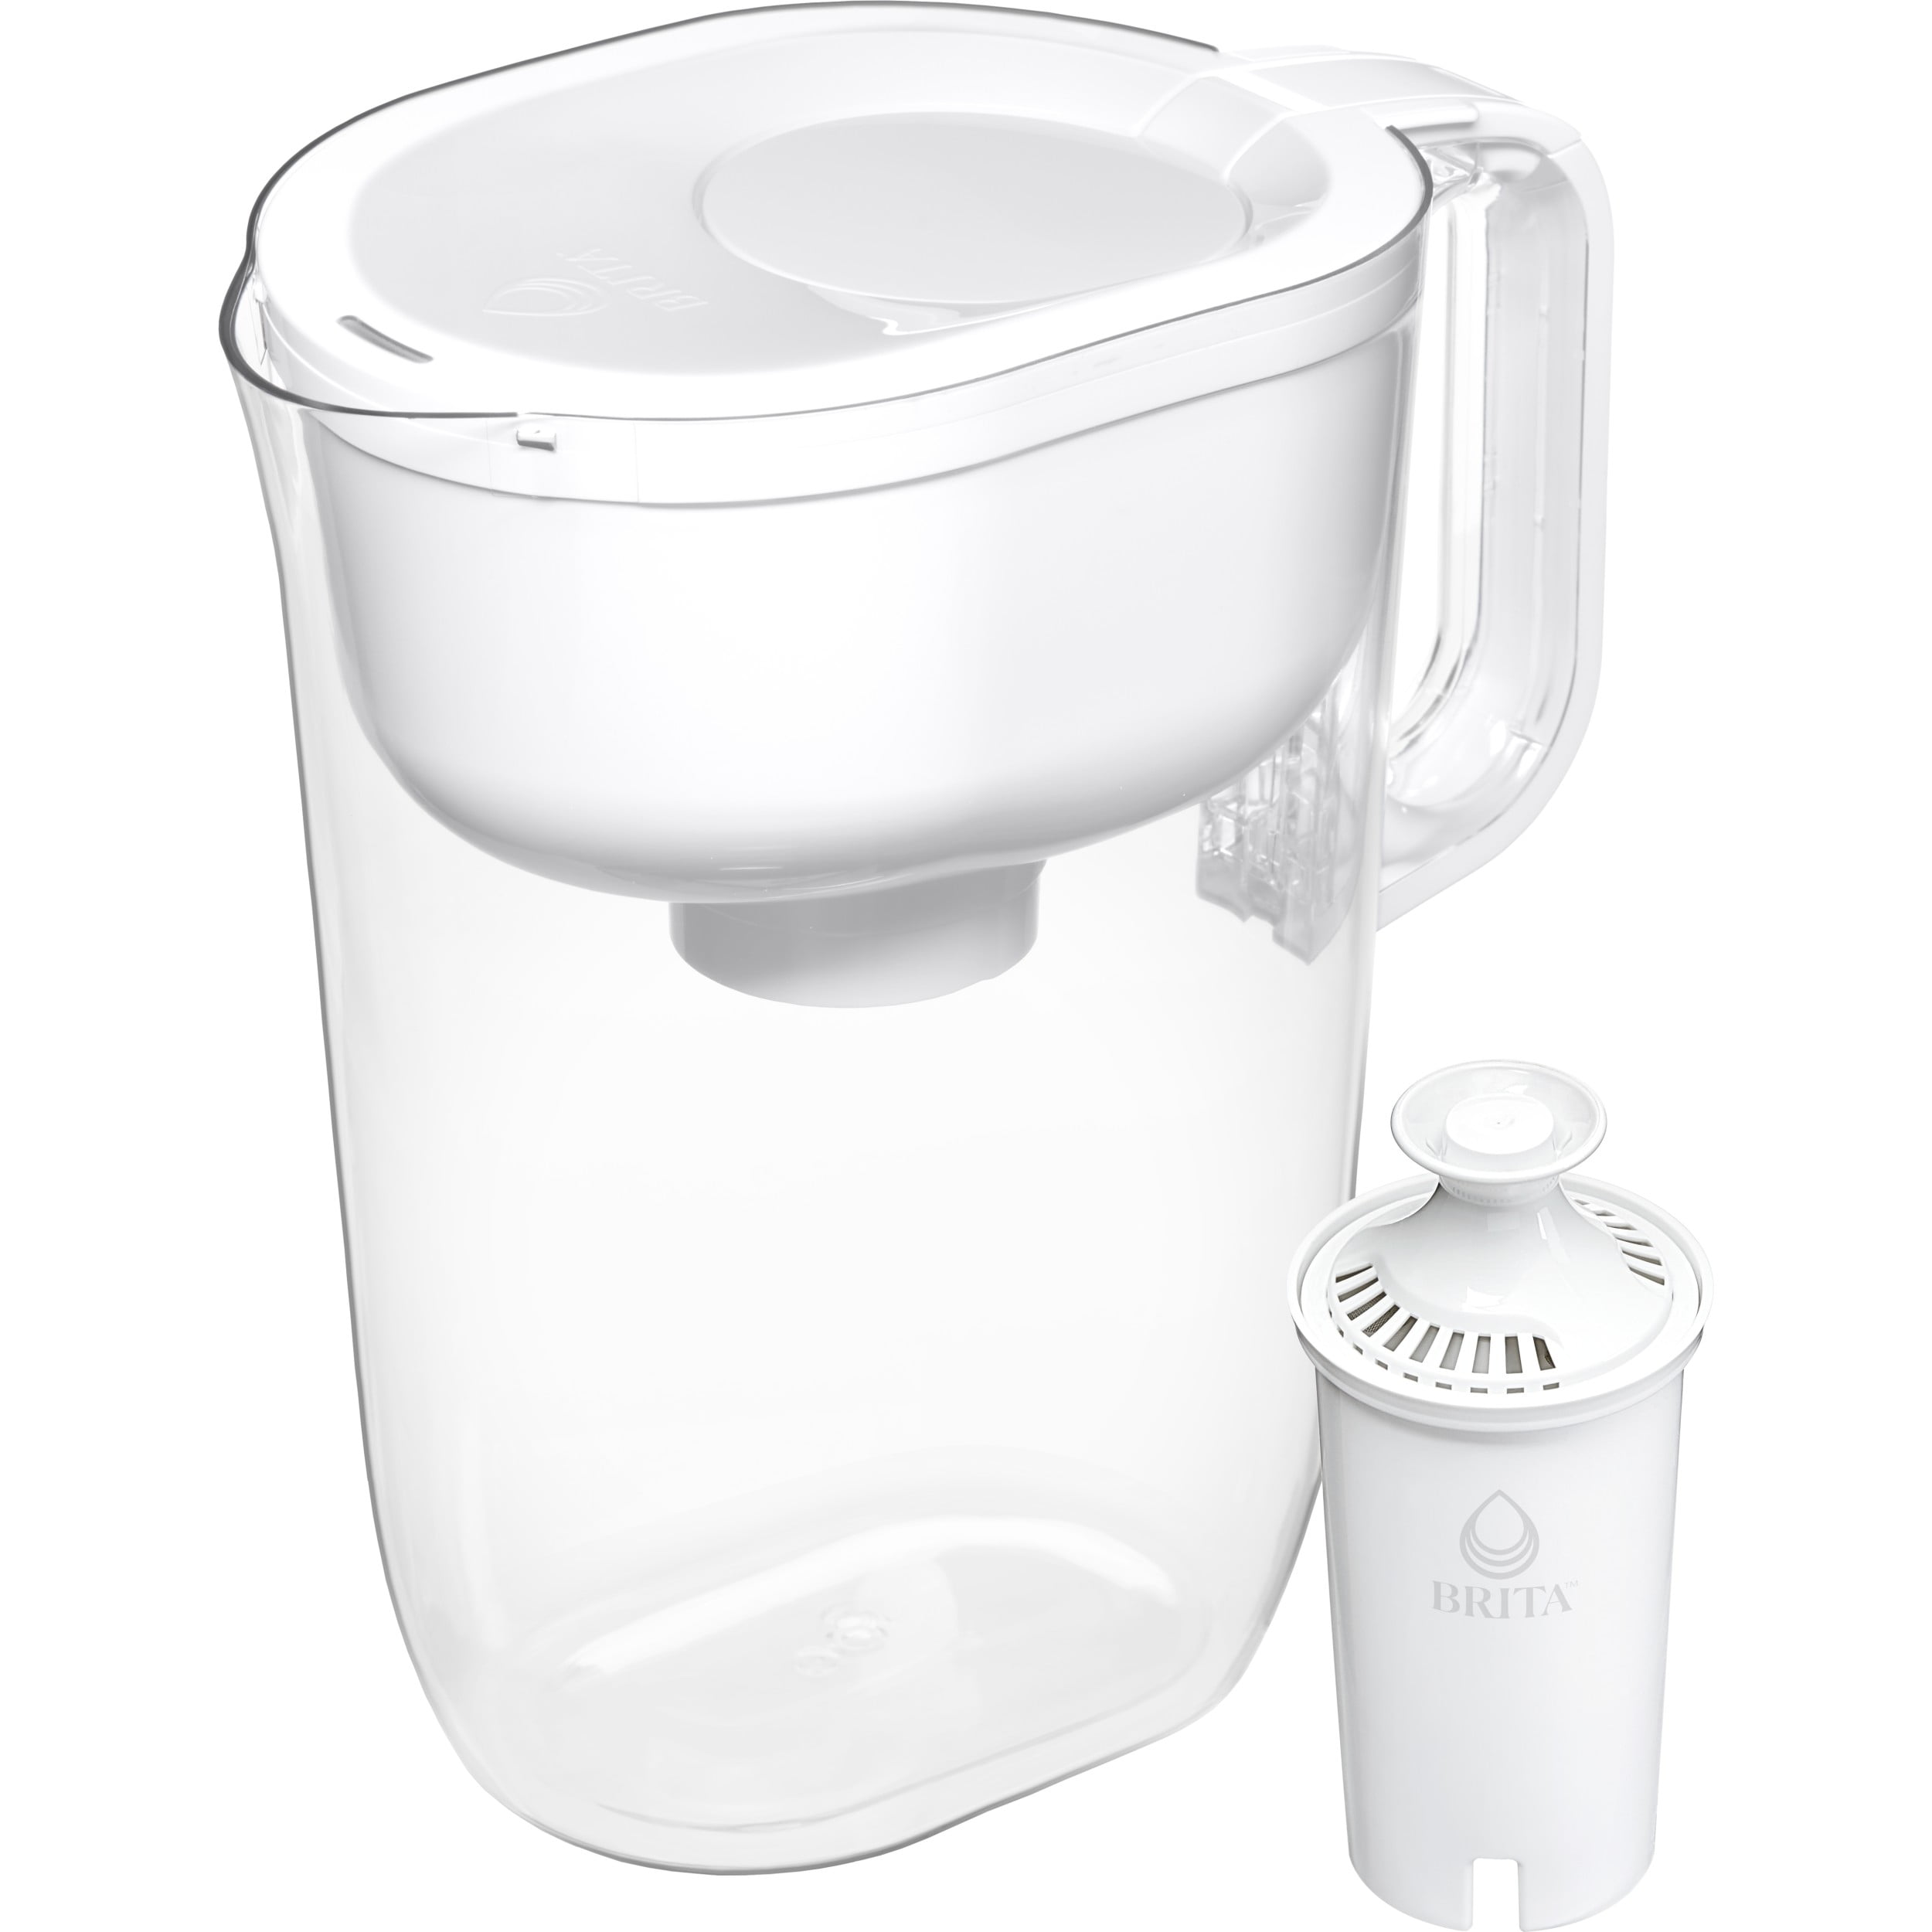 Brita MAXTRA PRO ALL-IN-1 Pitcher water filter White 1050420 buy in the  online store at Best Price